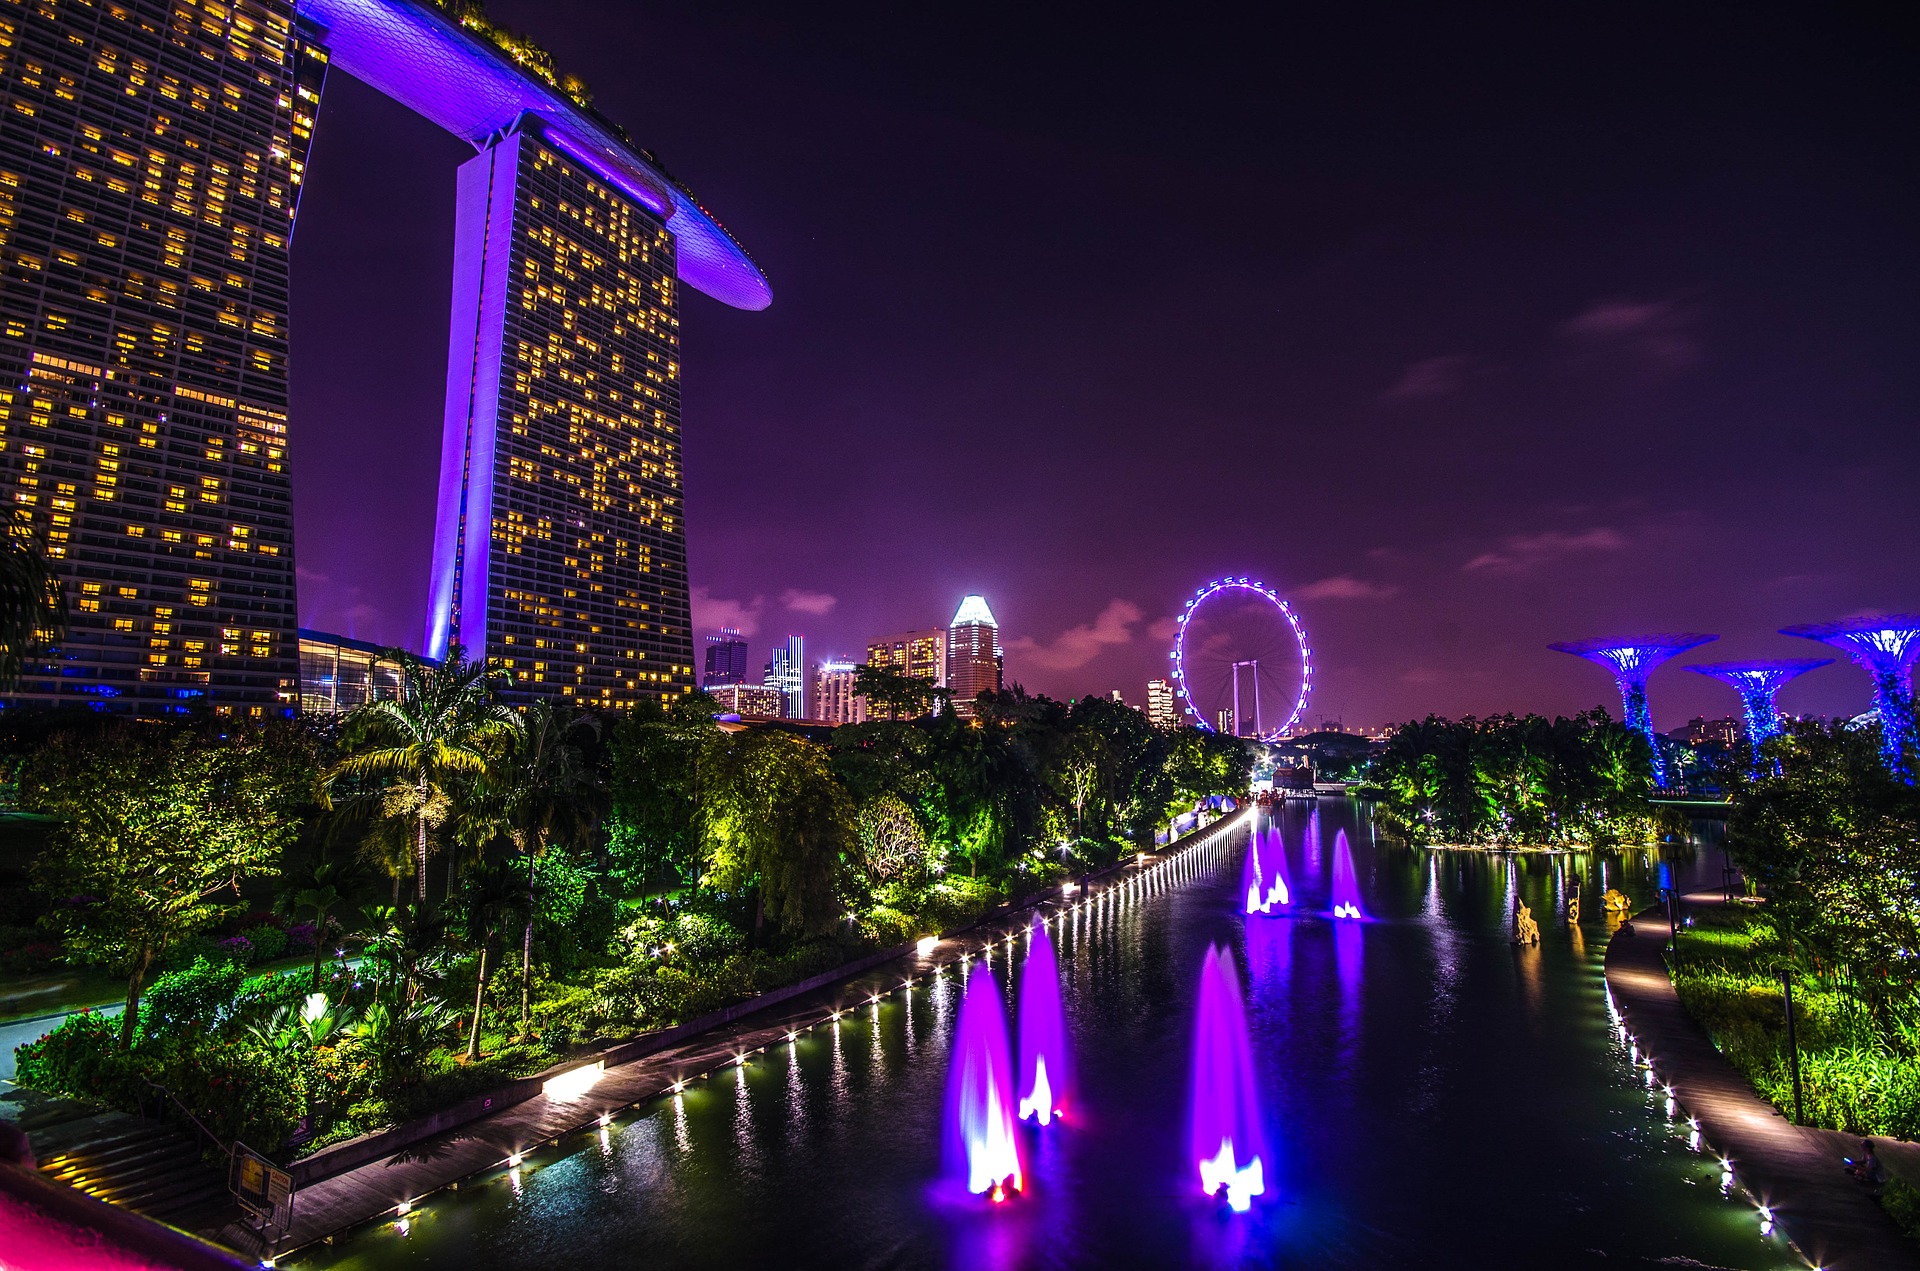 Working as an Expat in Singapore